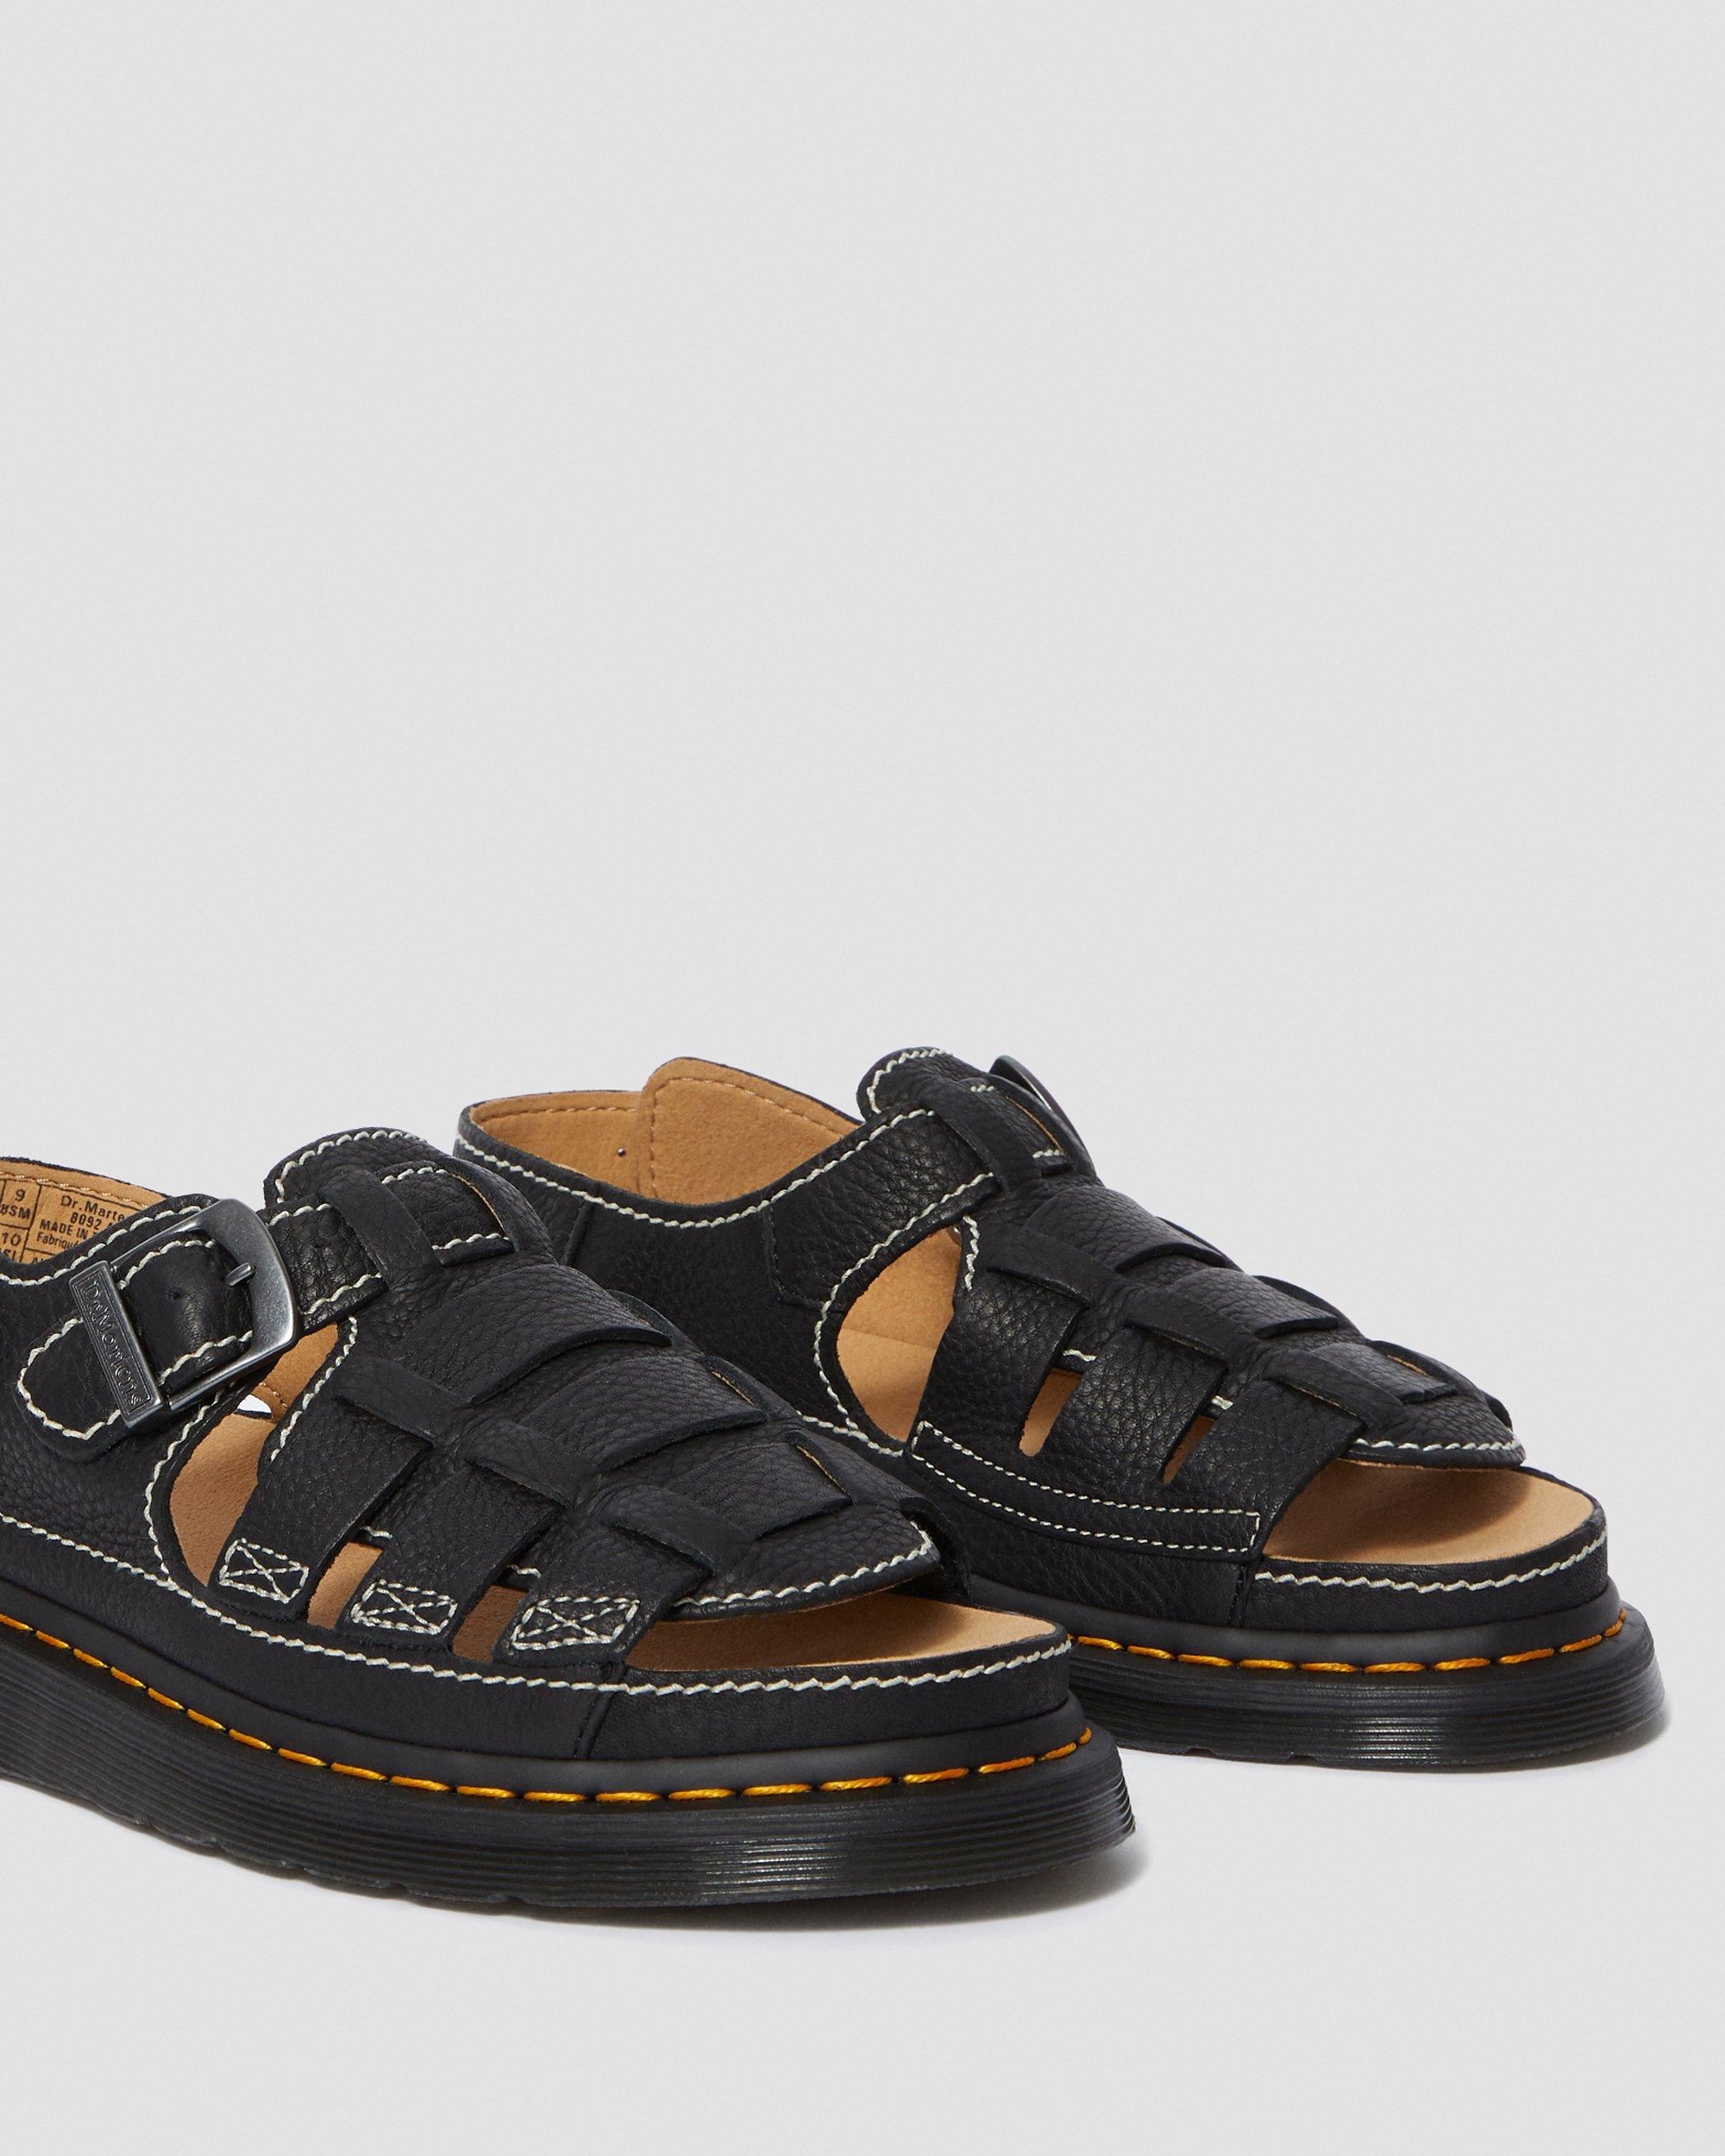 8092 archive grizzly sandals